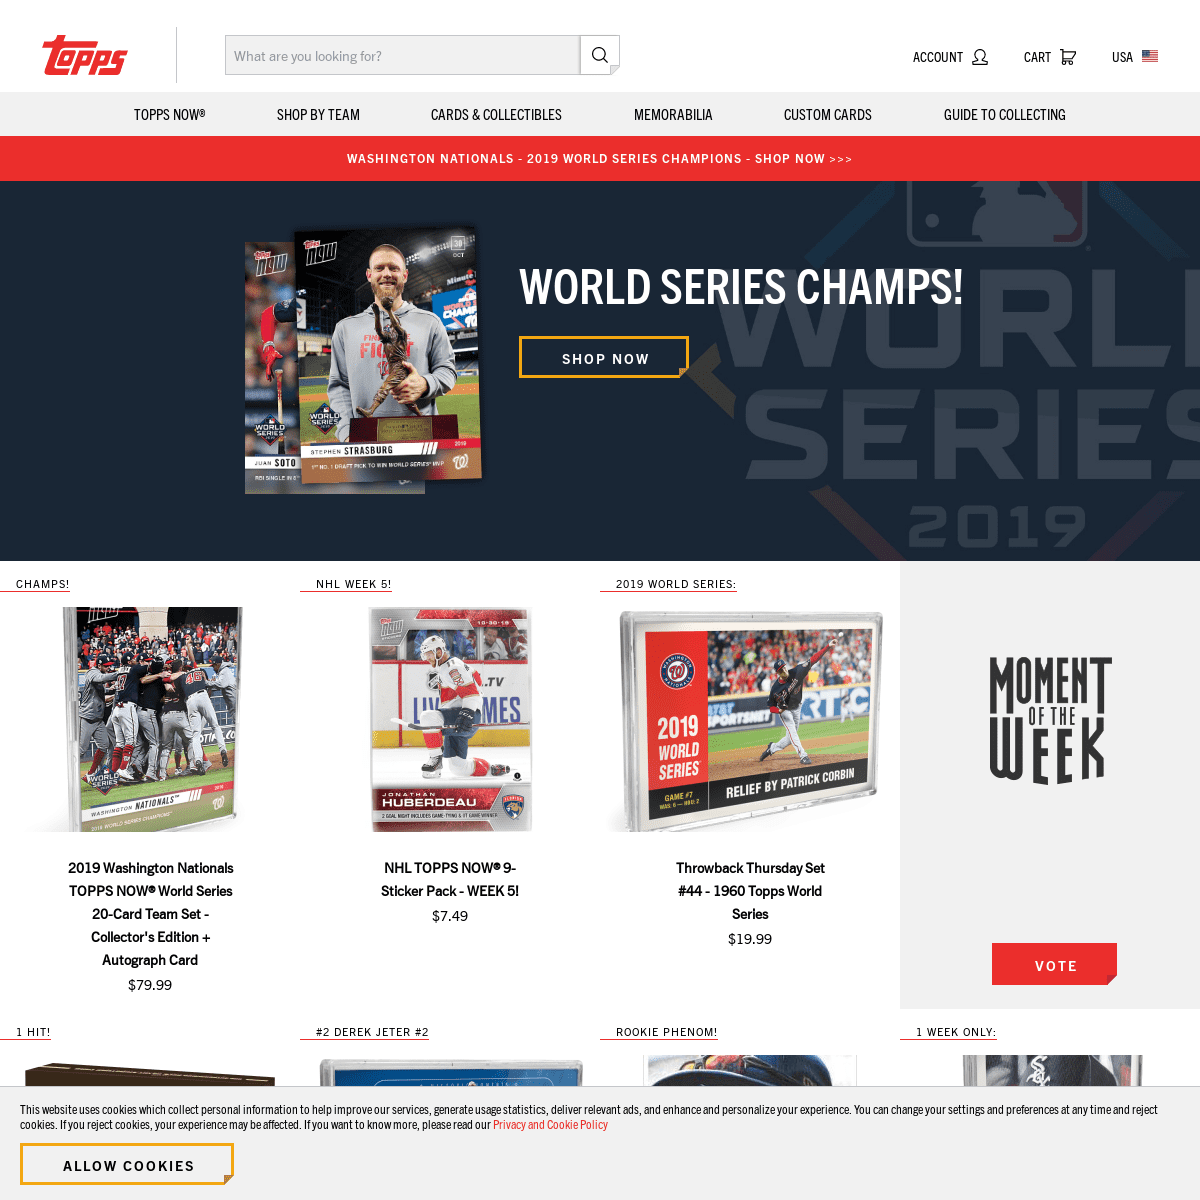 A complete backup of topps.com